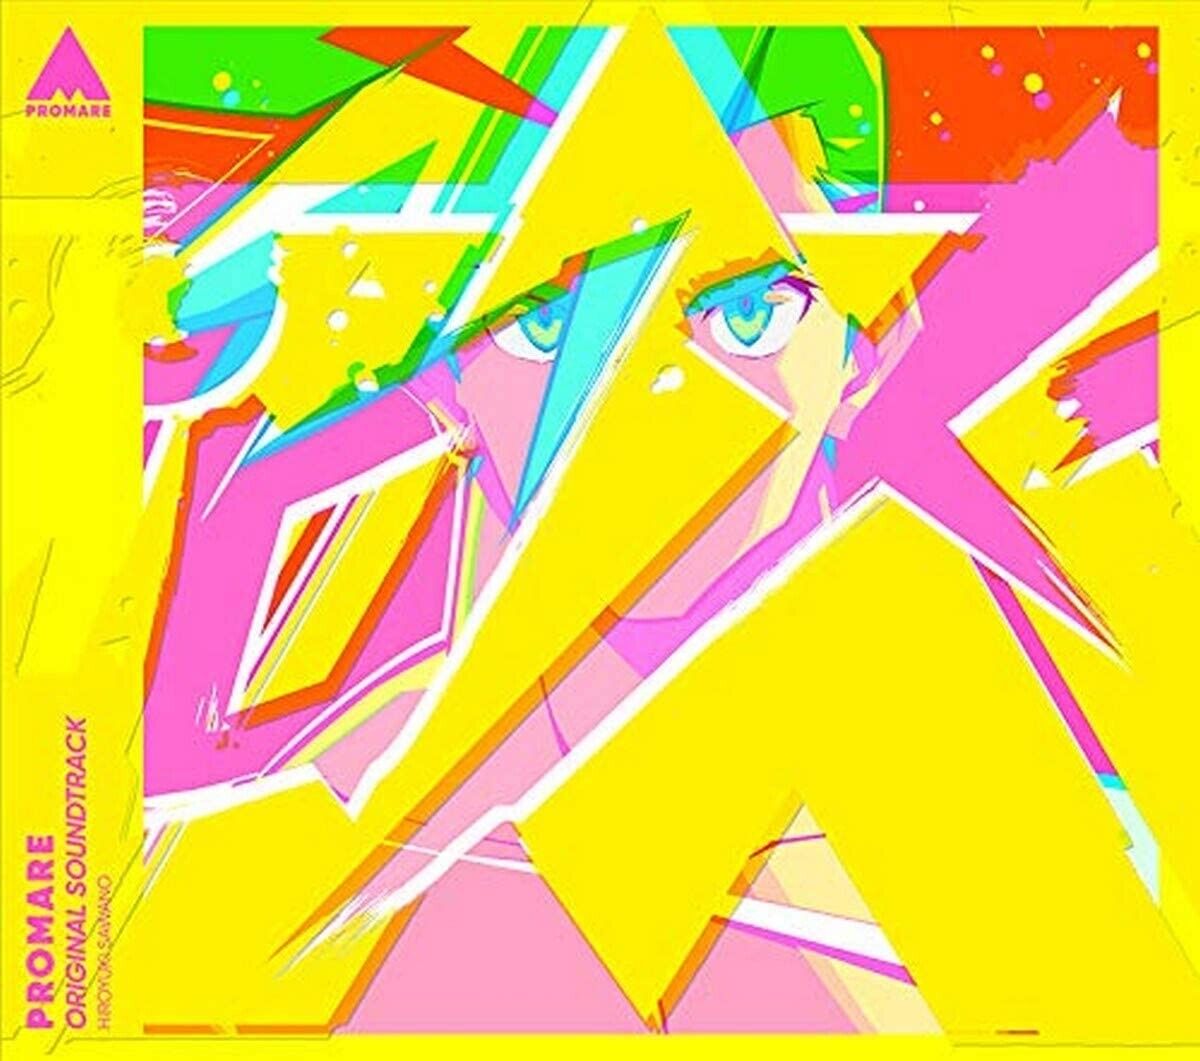 Promare Original Soundtrack First Limited Edition CD + Booklet Japan w/ Tracking